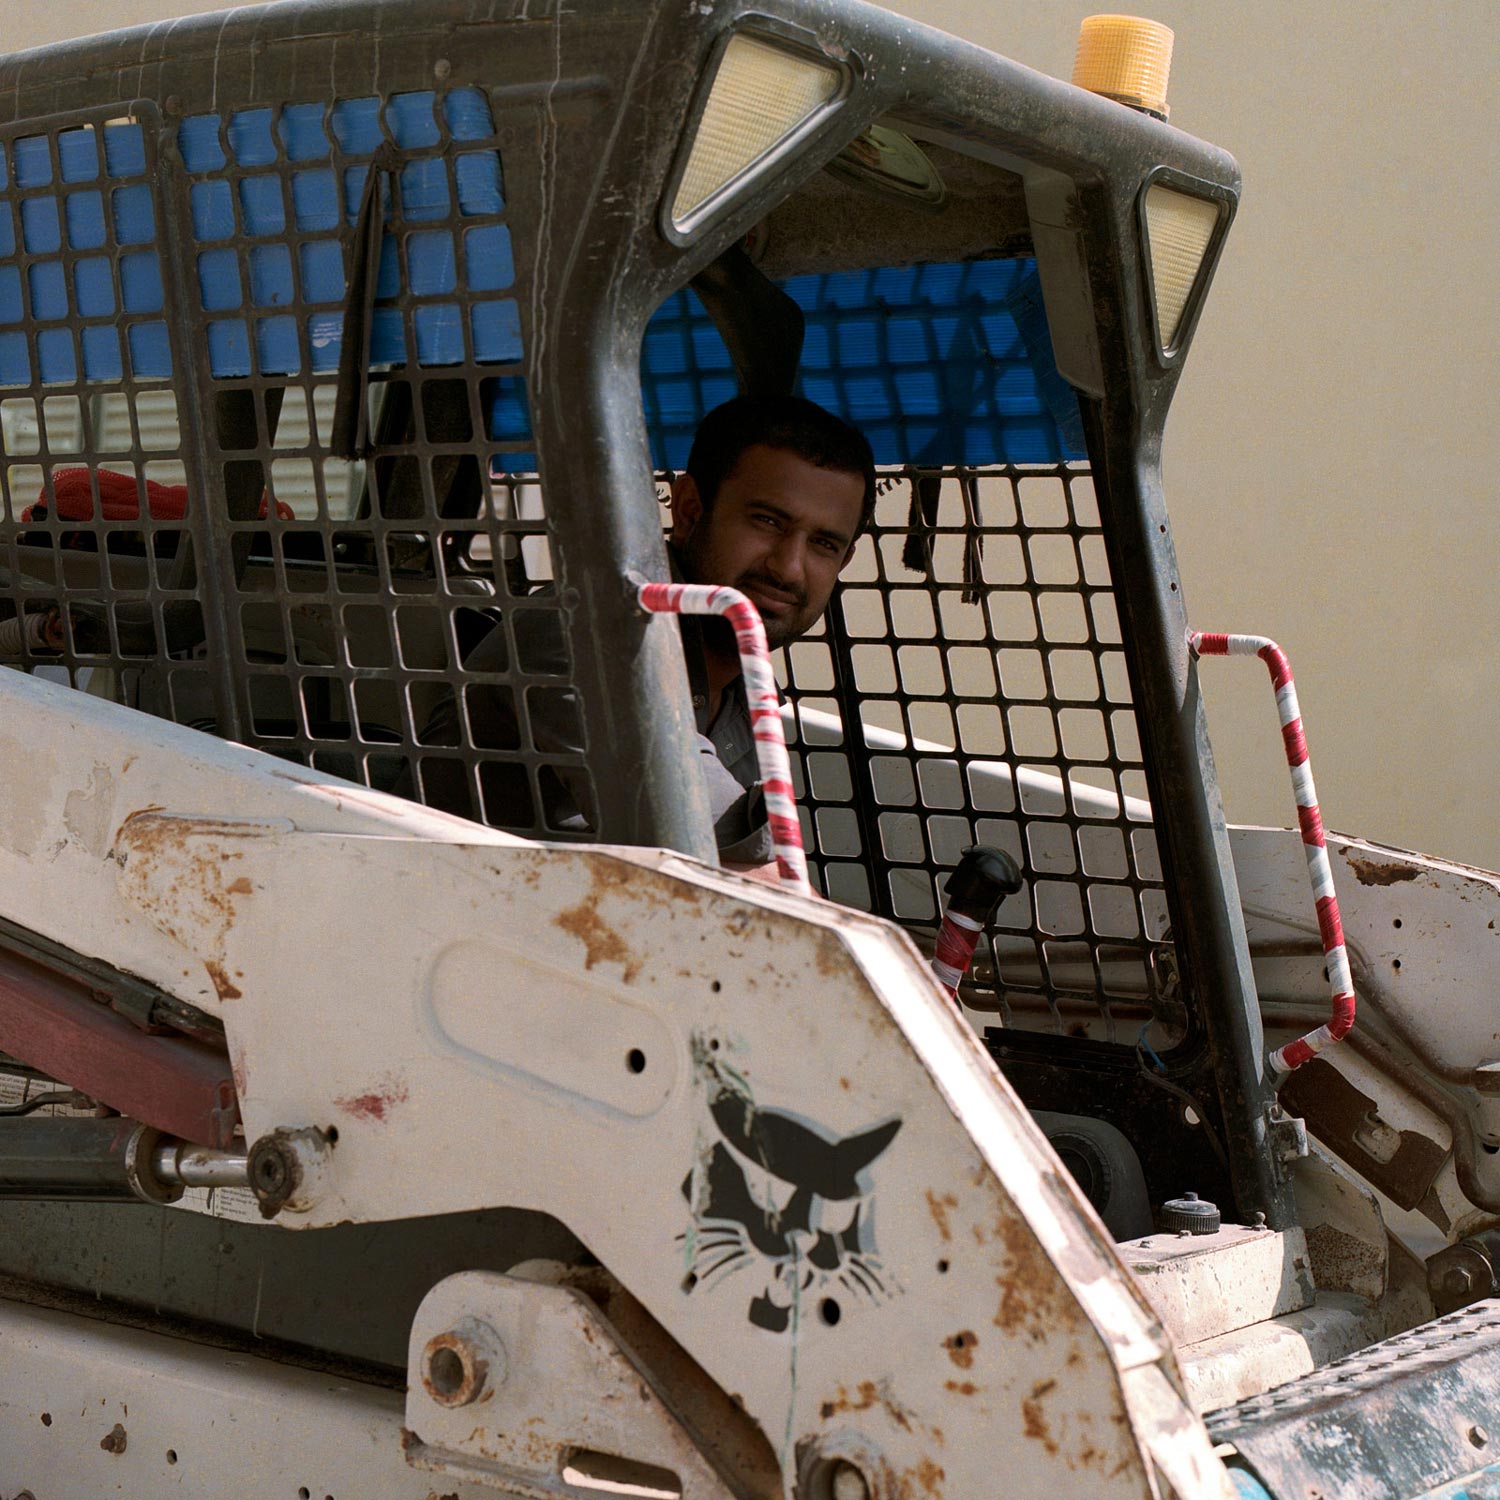 Construction worker looks out from digger machine, in Dubai.